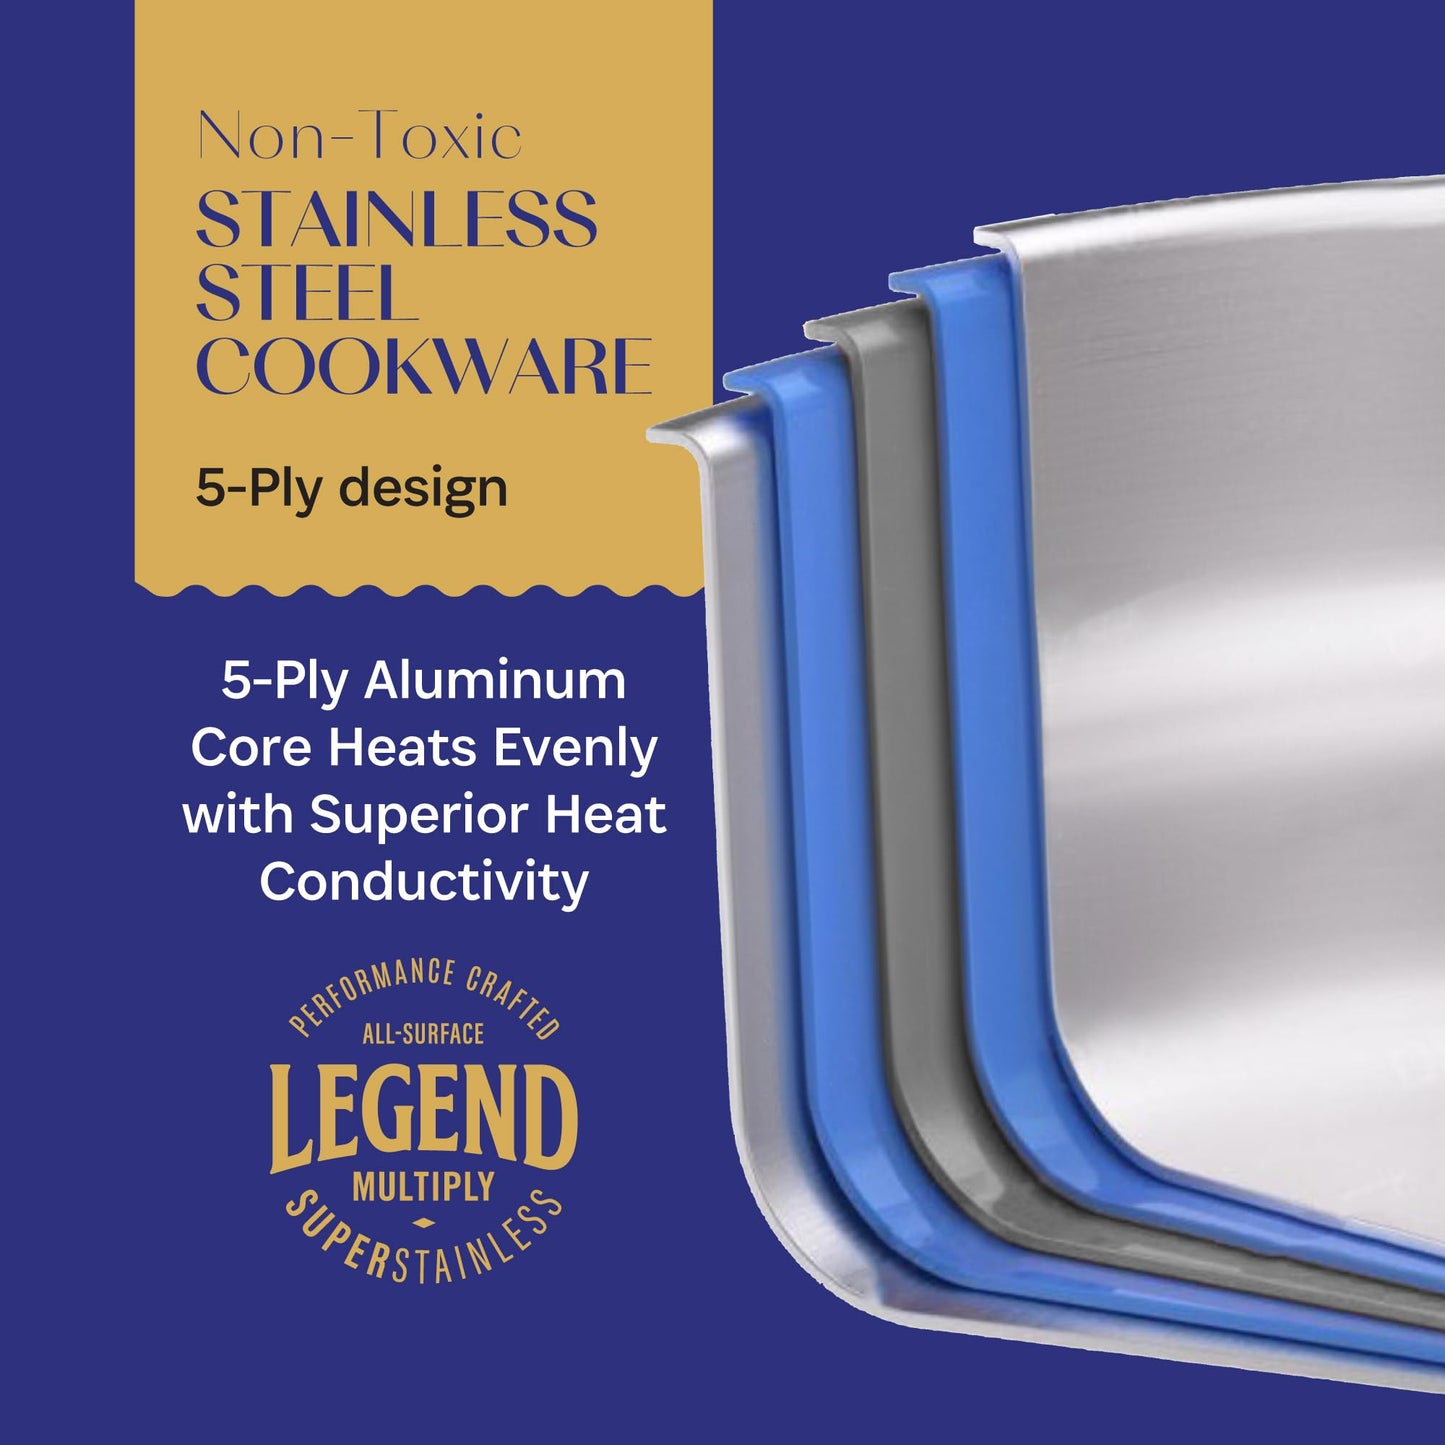 Legend 5 Ply 14 pc All Stainless Steel Heavy Pots & Pans Set | Professional Quality Cookware 5ply Clad Home Cooking & Commercial Kitchen Surface Induction Oven Safe | Non-Teflon PFOA, PTFE & PFOS Free